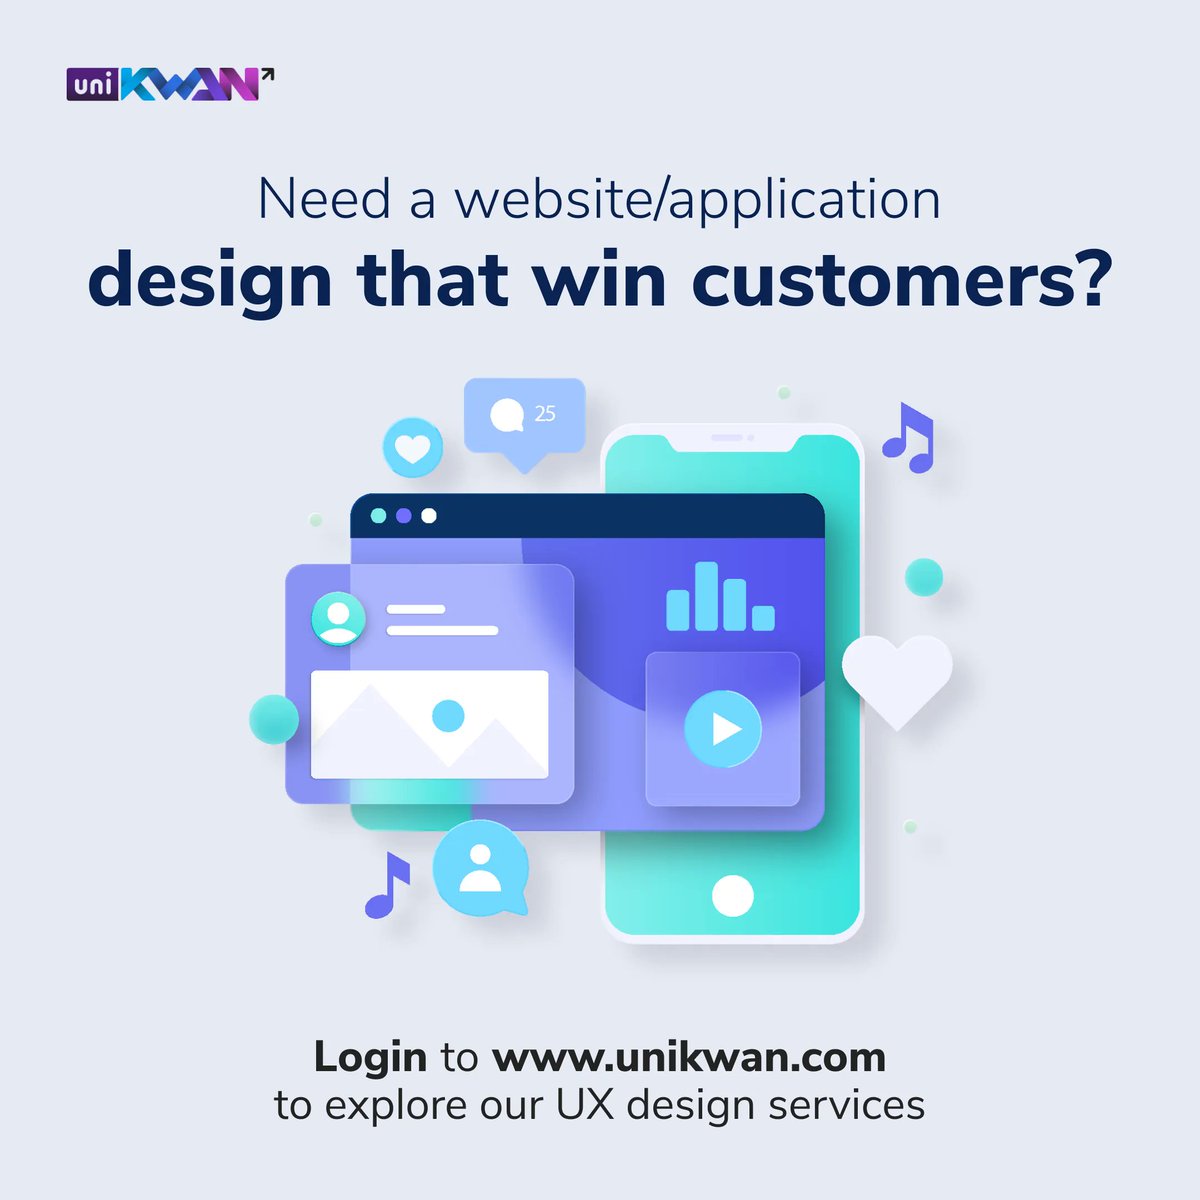 Transforming ideas into user centric designs for #digital platforms. Need a website/application #design that win customers? Login to buff.ly/2FfjjBb to explore our UX design services or reach out to us at hello@unikwan.com. #unikwanforux #userexperience #designagency